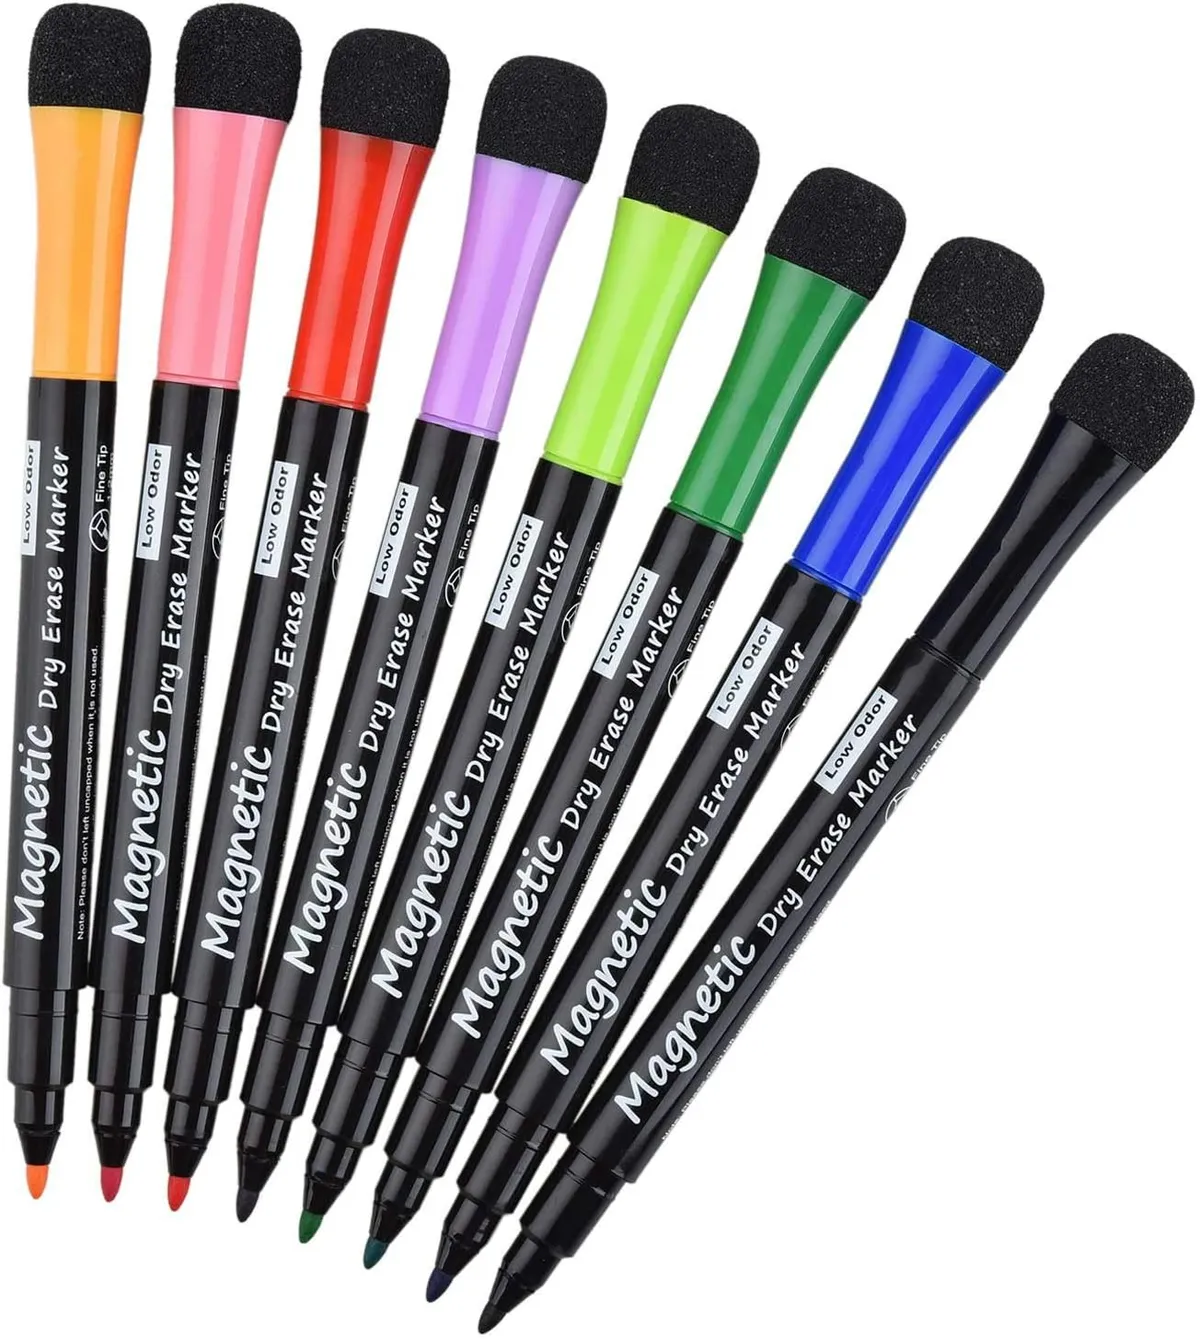 Magnetic Dry Erase Markers with erasers